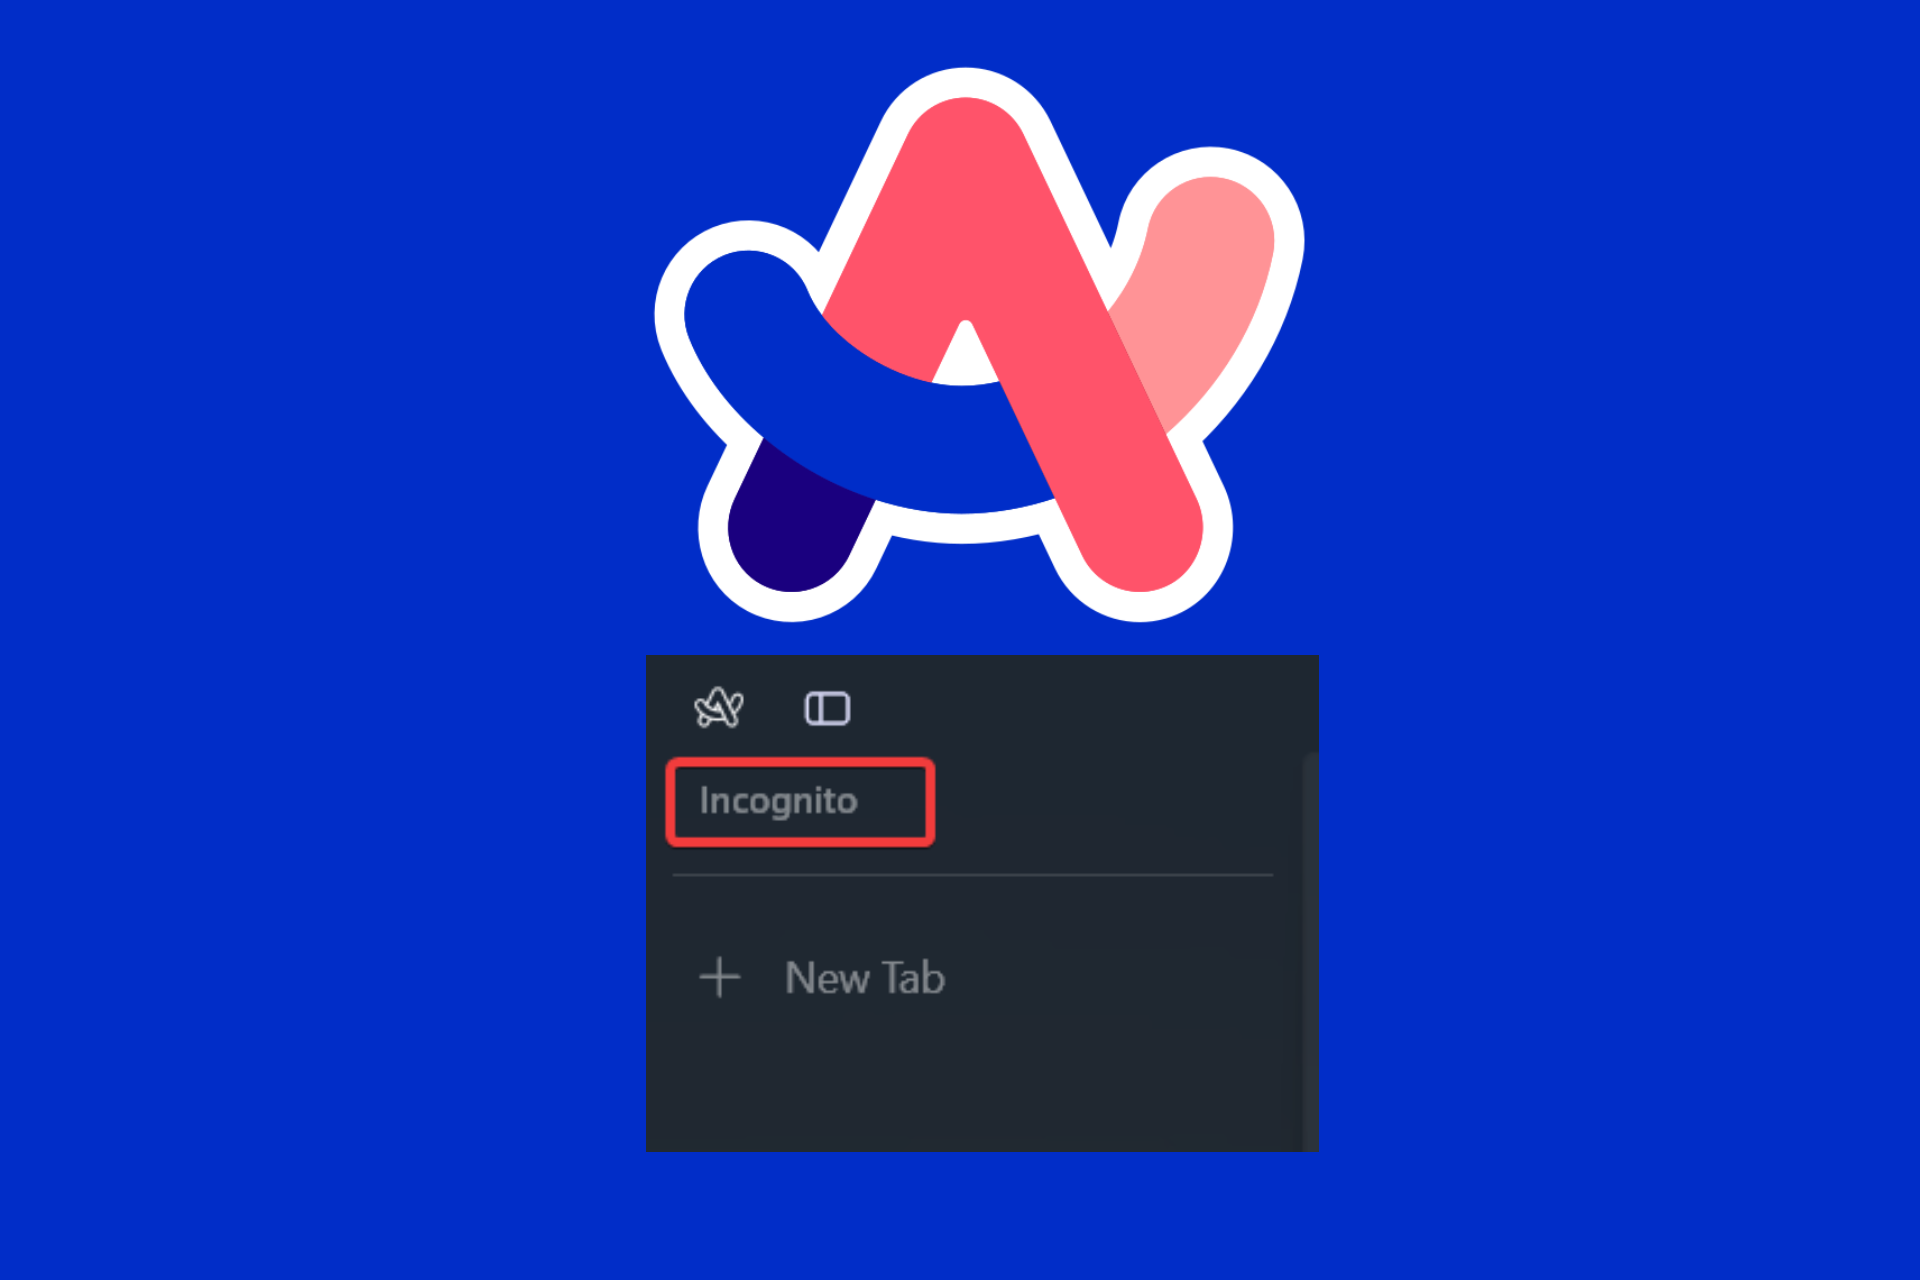 How to open an incognito window in Arc Browser